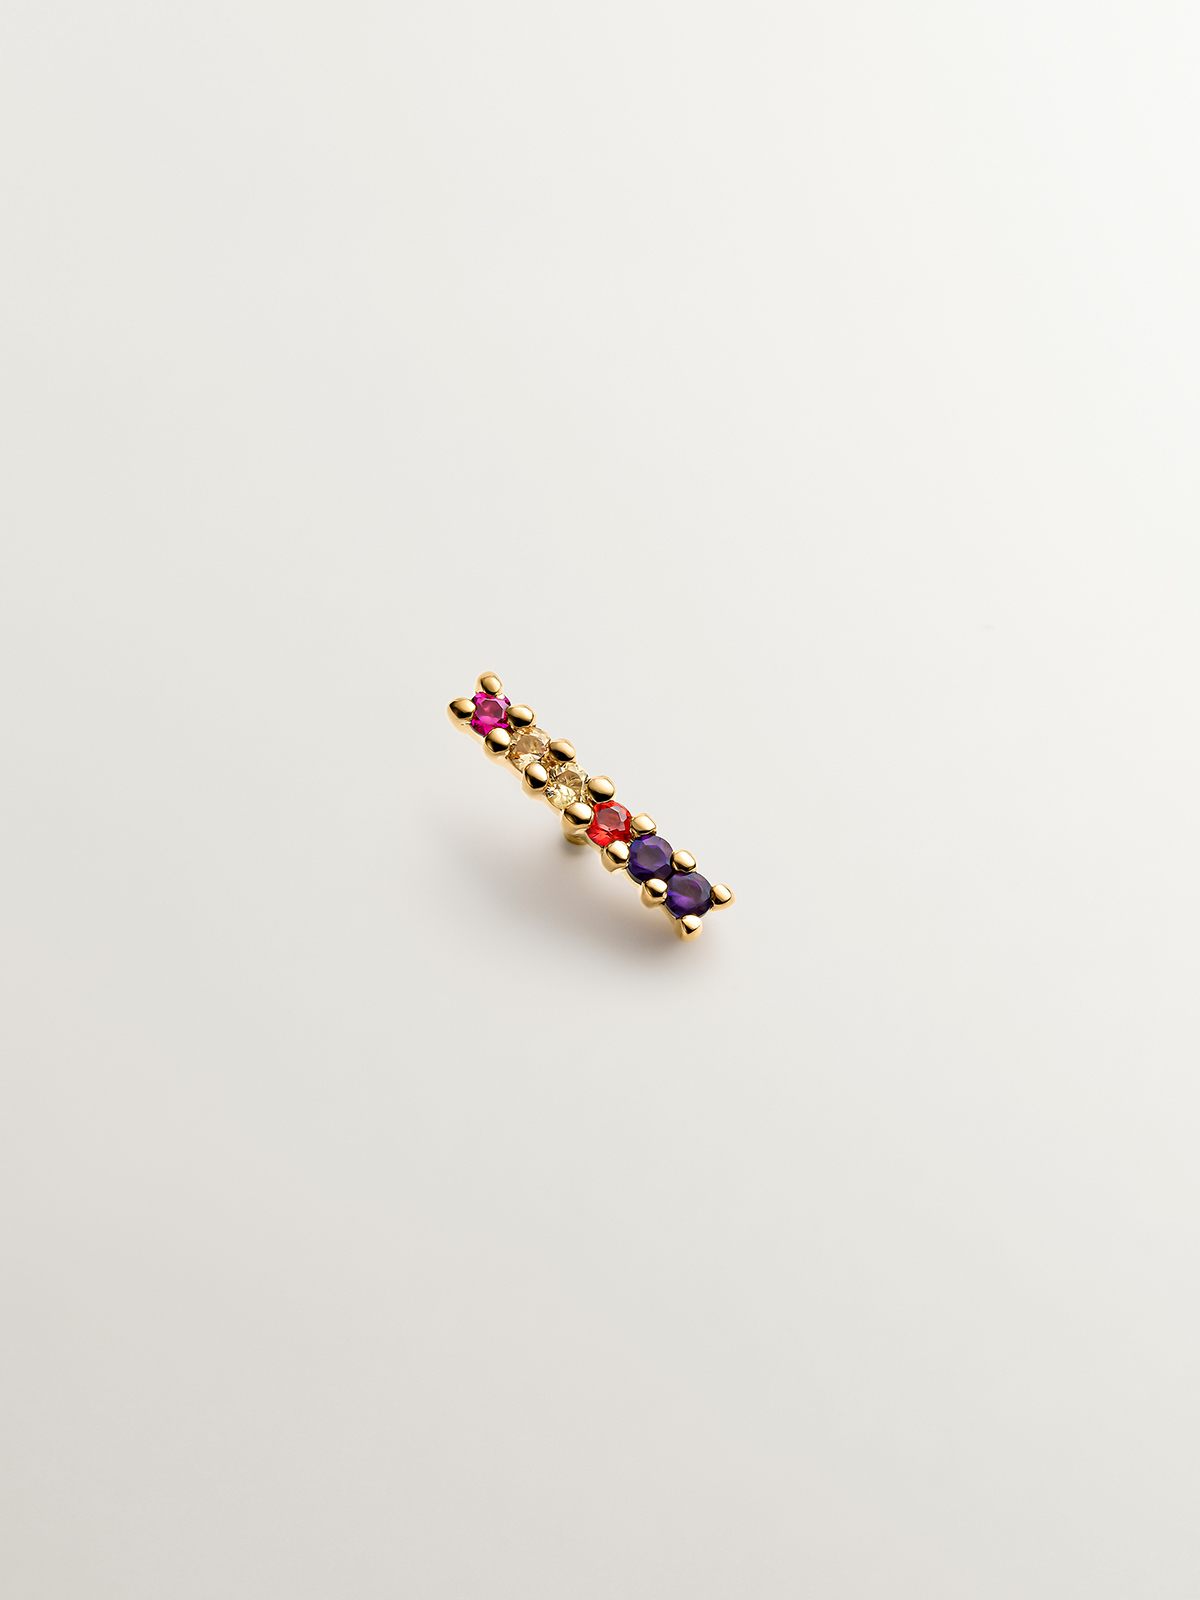 18K yellow gold line piercing with amethyst, ruby and multicolor sapphires.